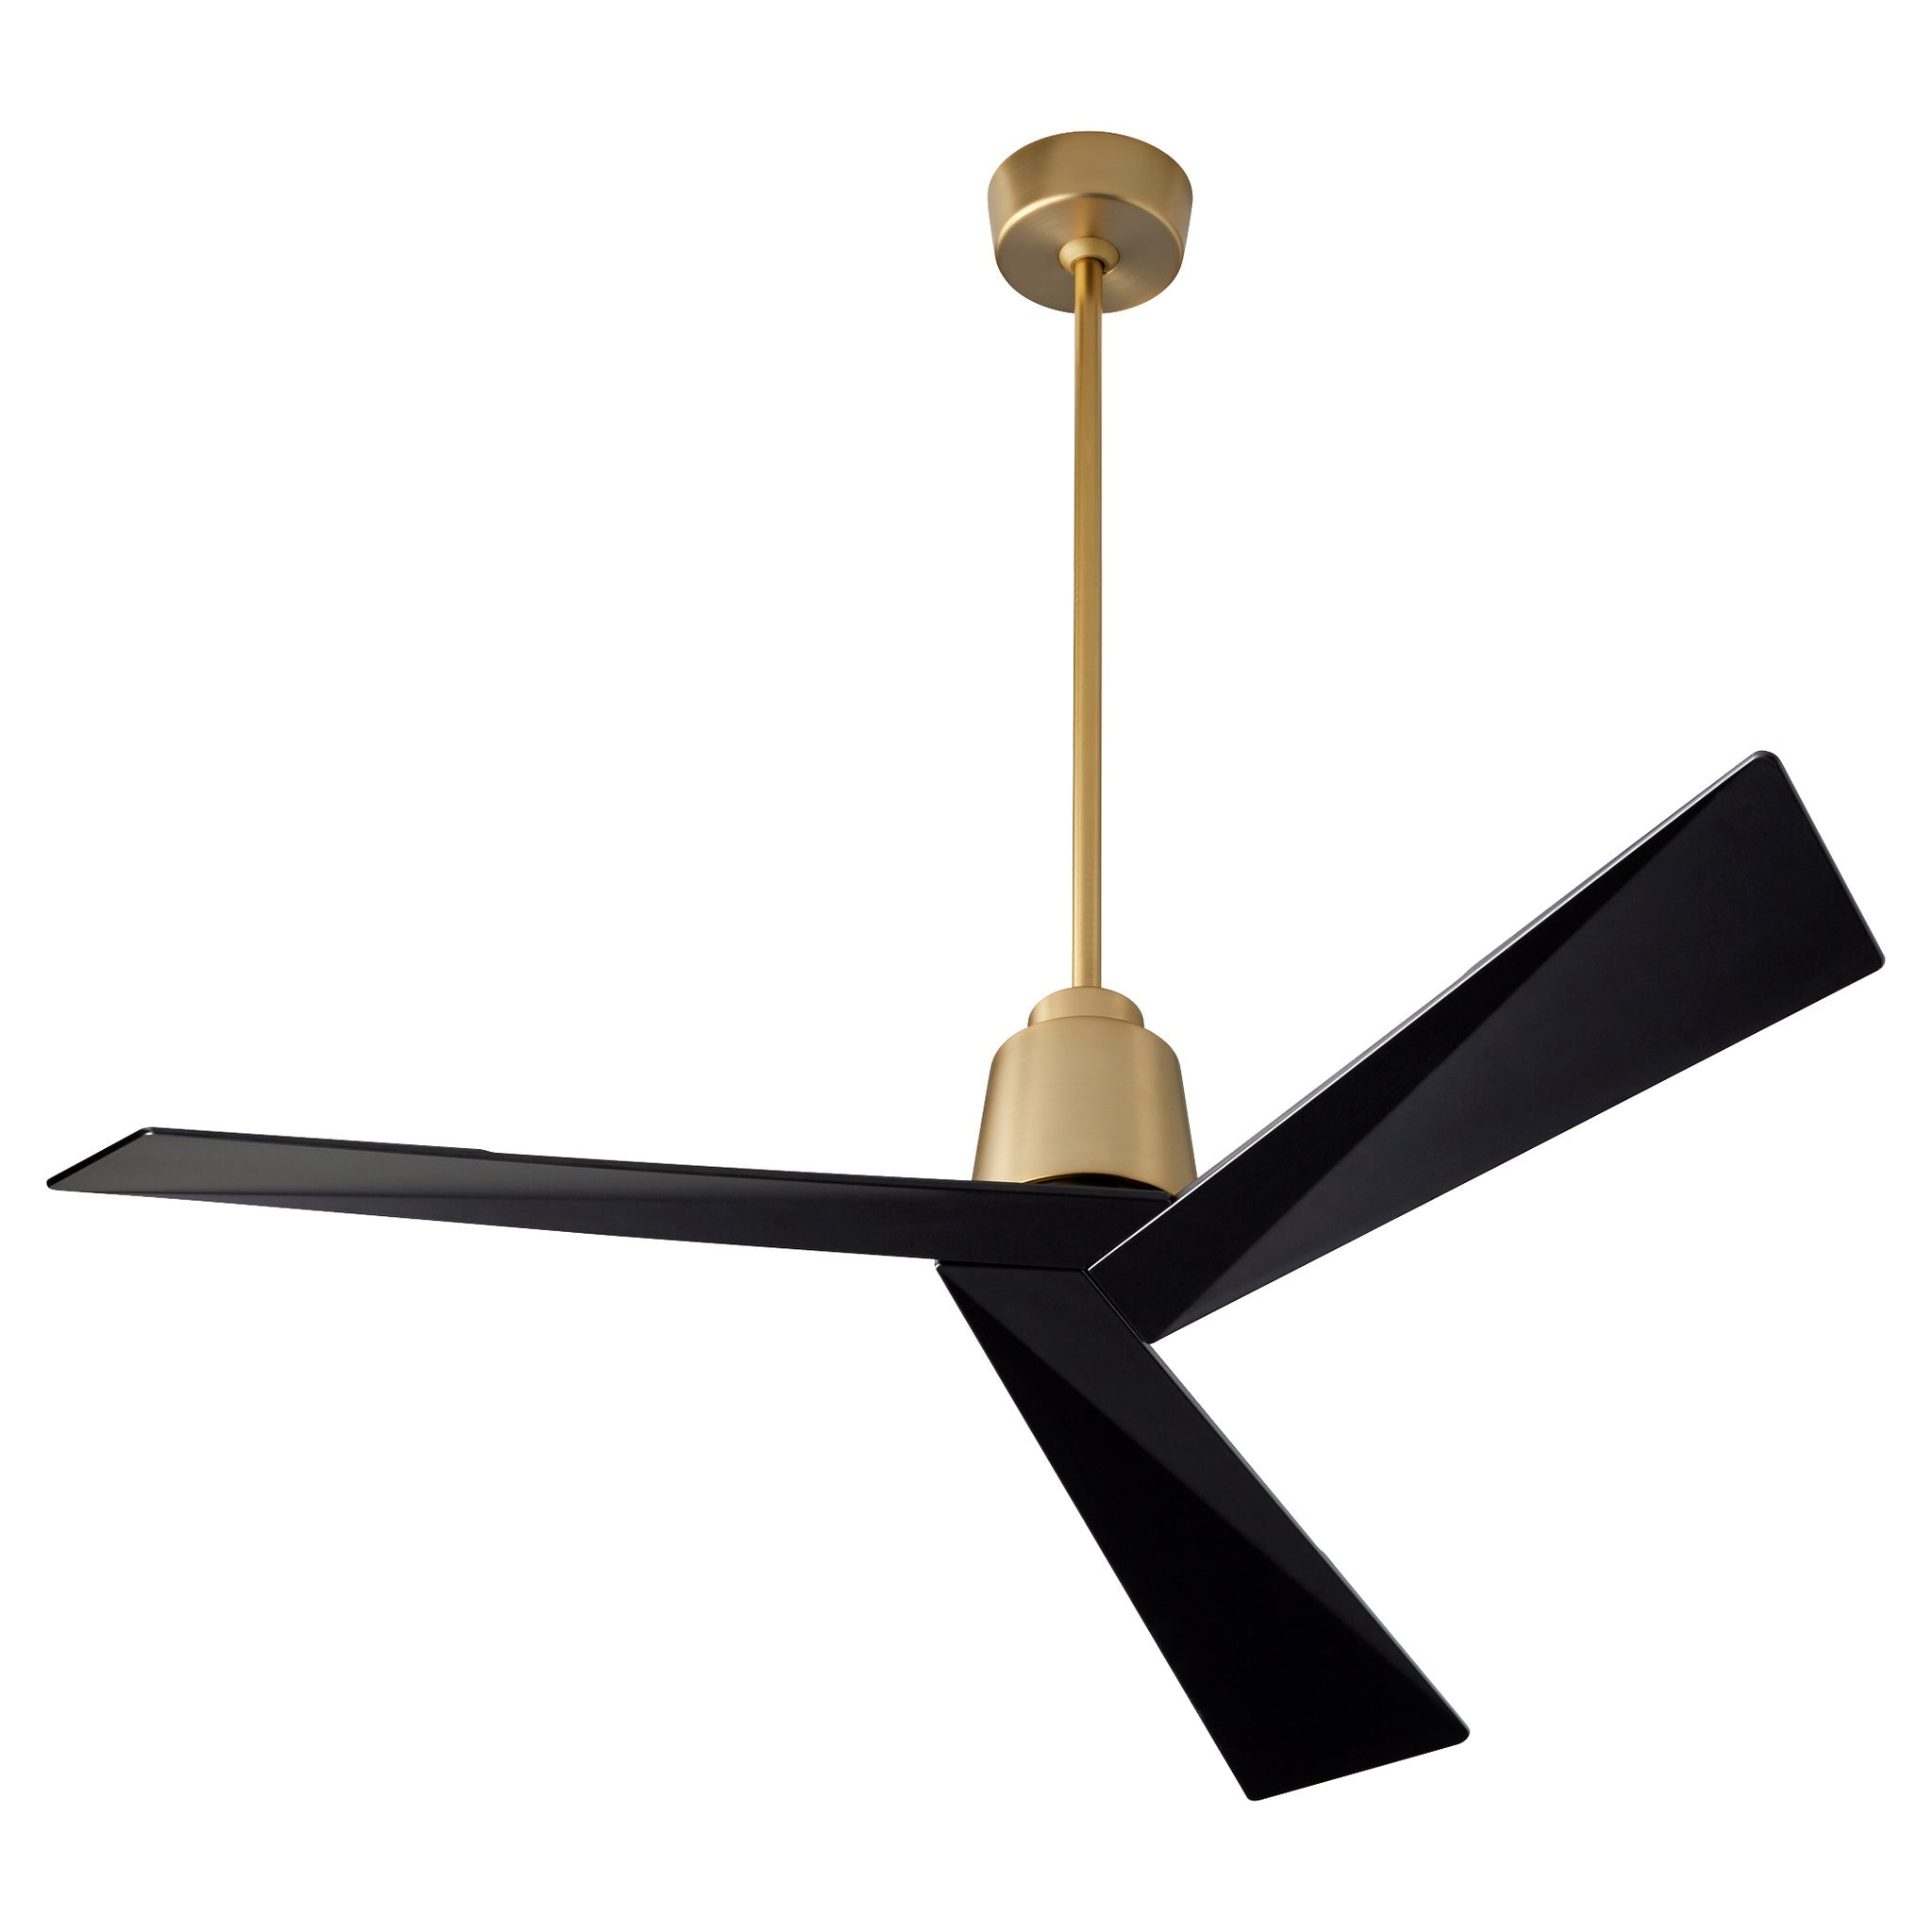 Oxygen DYNAMO Ceiling Fan - Modern, Contemporary - 54 Inch - Damp Rated - 6 Speeds - Reversible with Remote